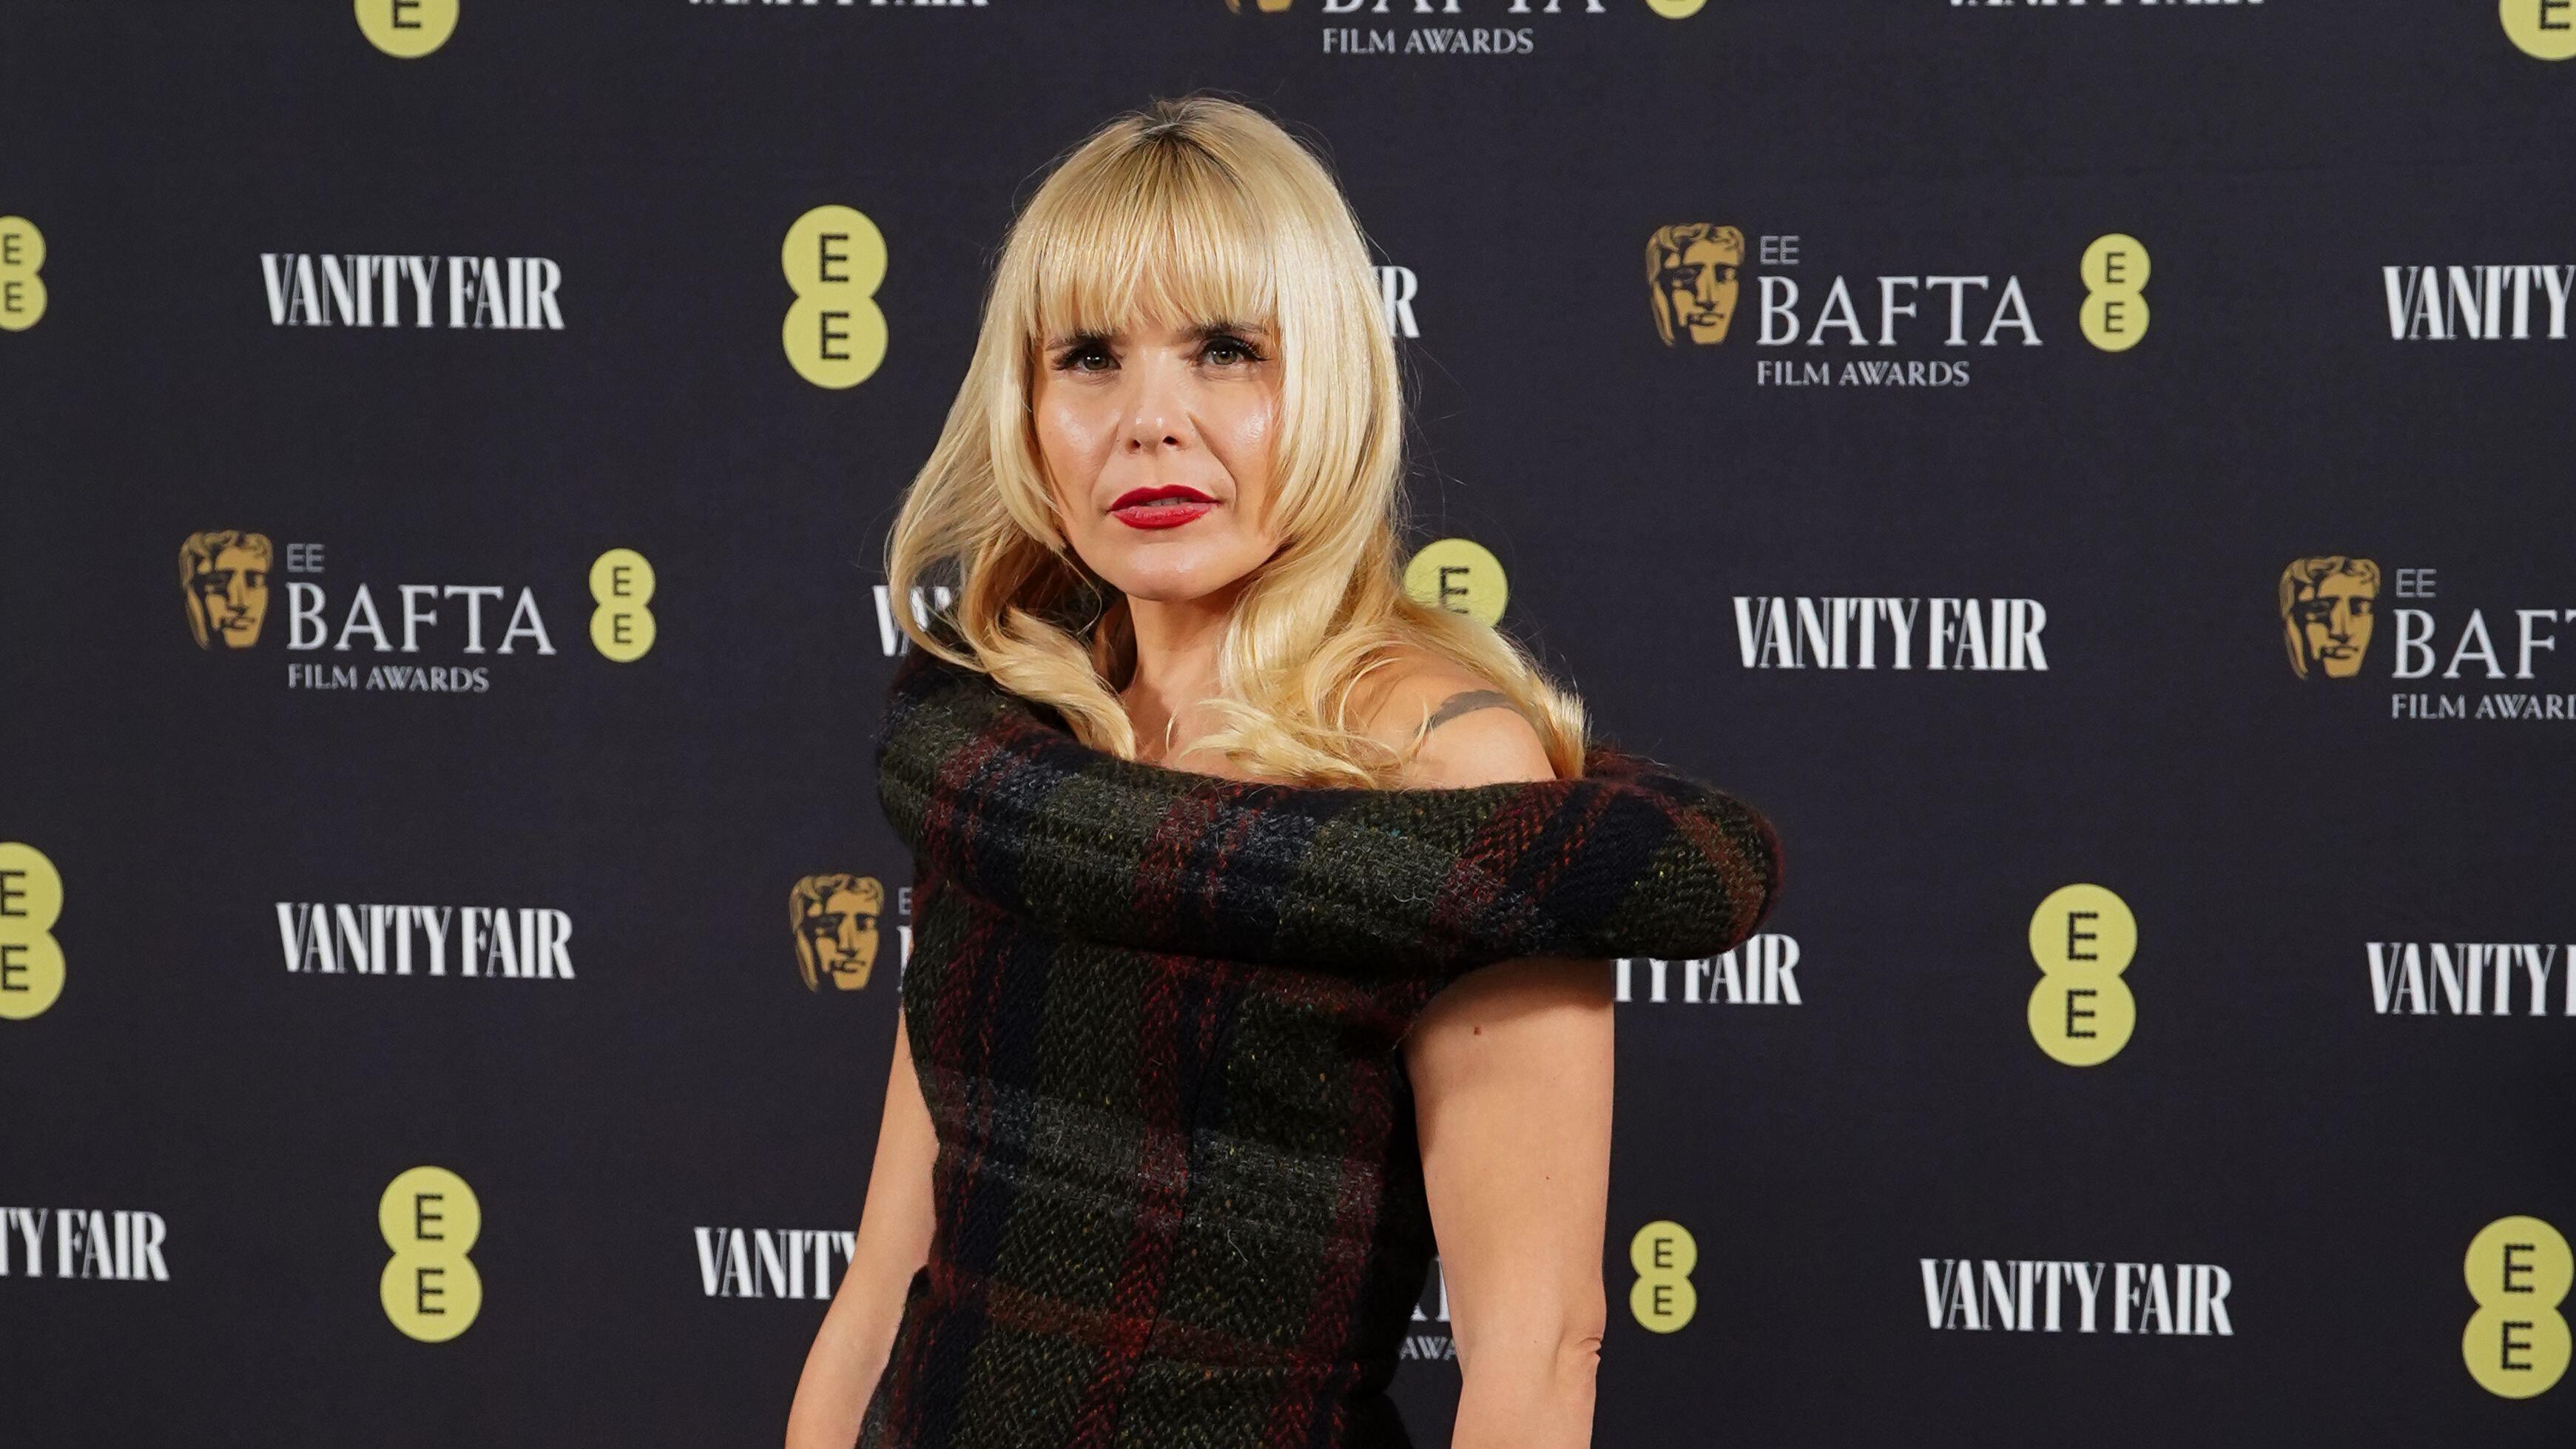 Singer Paloma Faith opens up about her stress-related hair loss